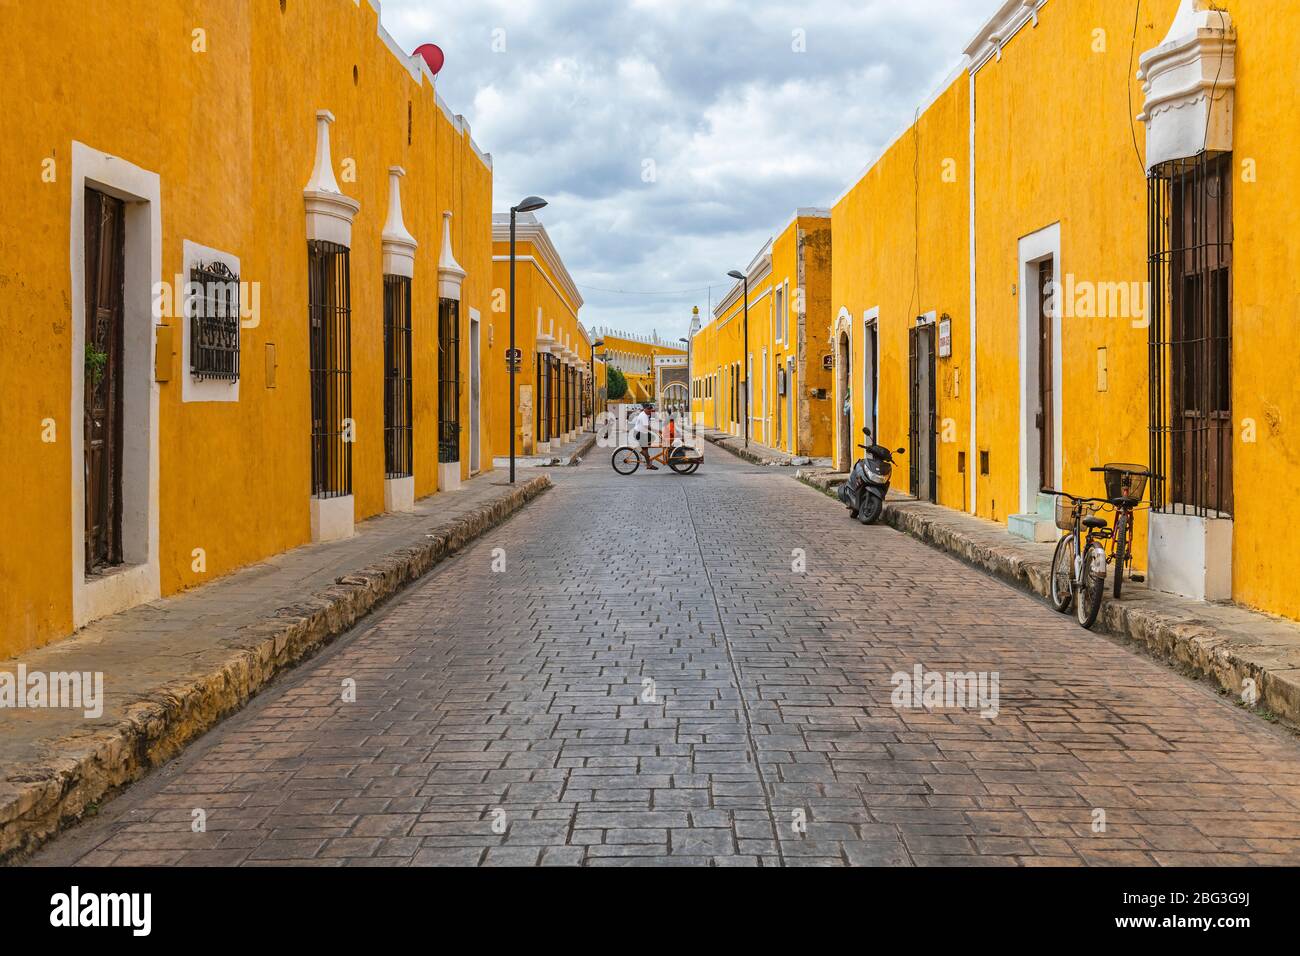 Cityscape with people on a Tricycle in the colorful yellow streets with colonial style architecture, Izamal, Mexico. Stock Photo